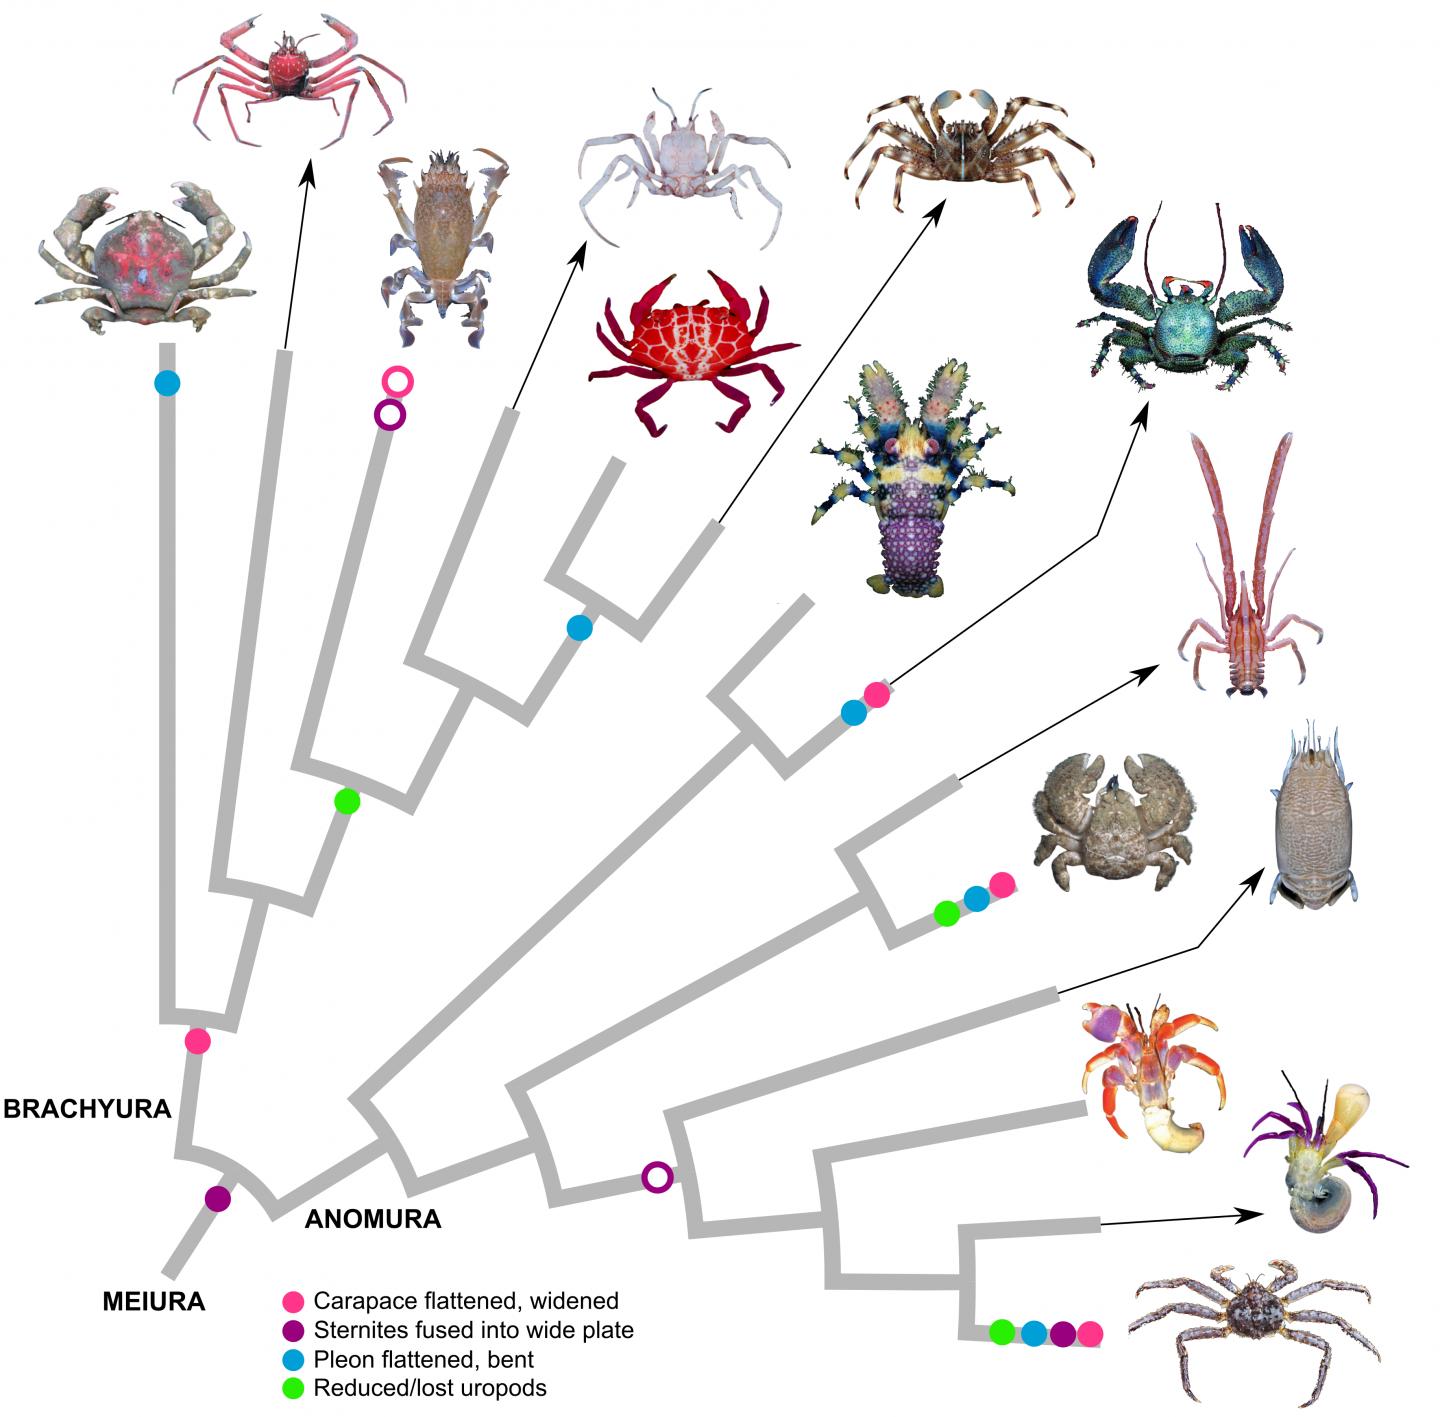 Taxonomic tree showing carcinized and decarcinized crab lineages